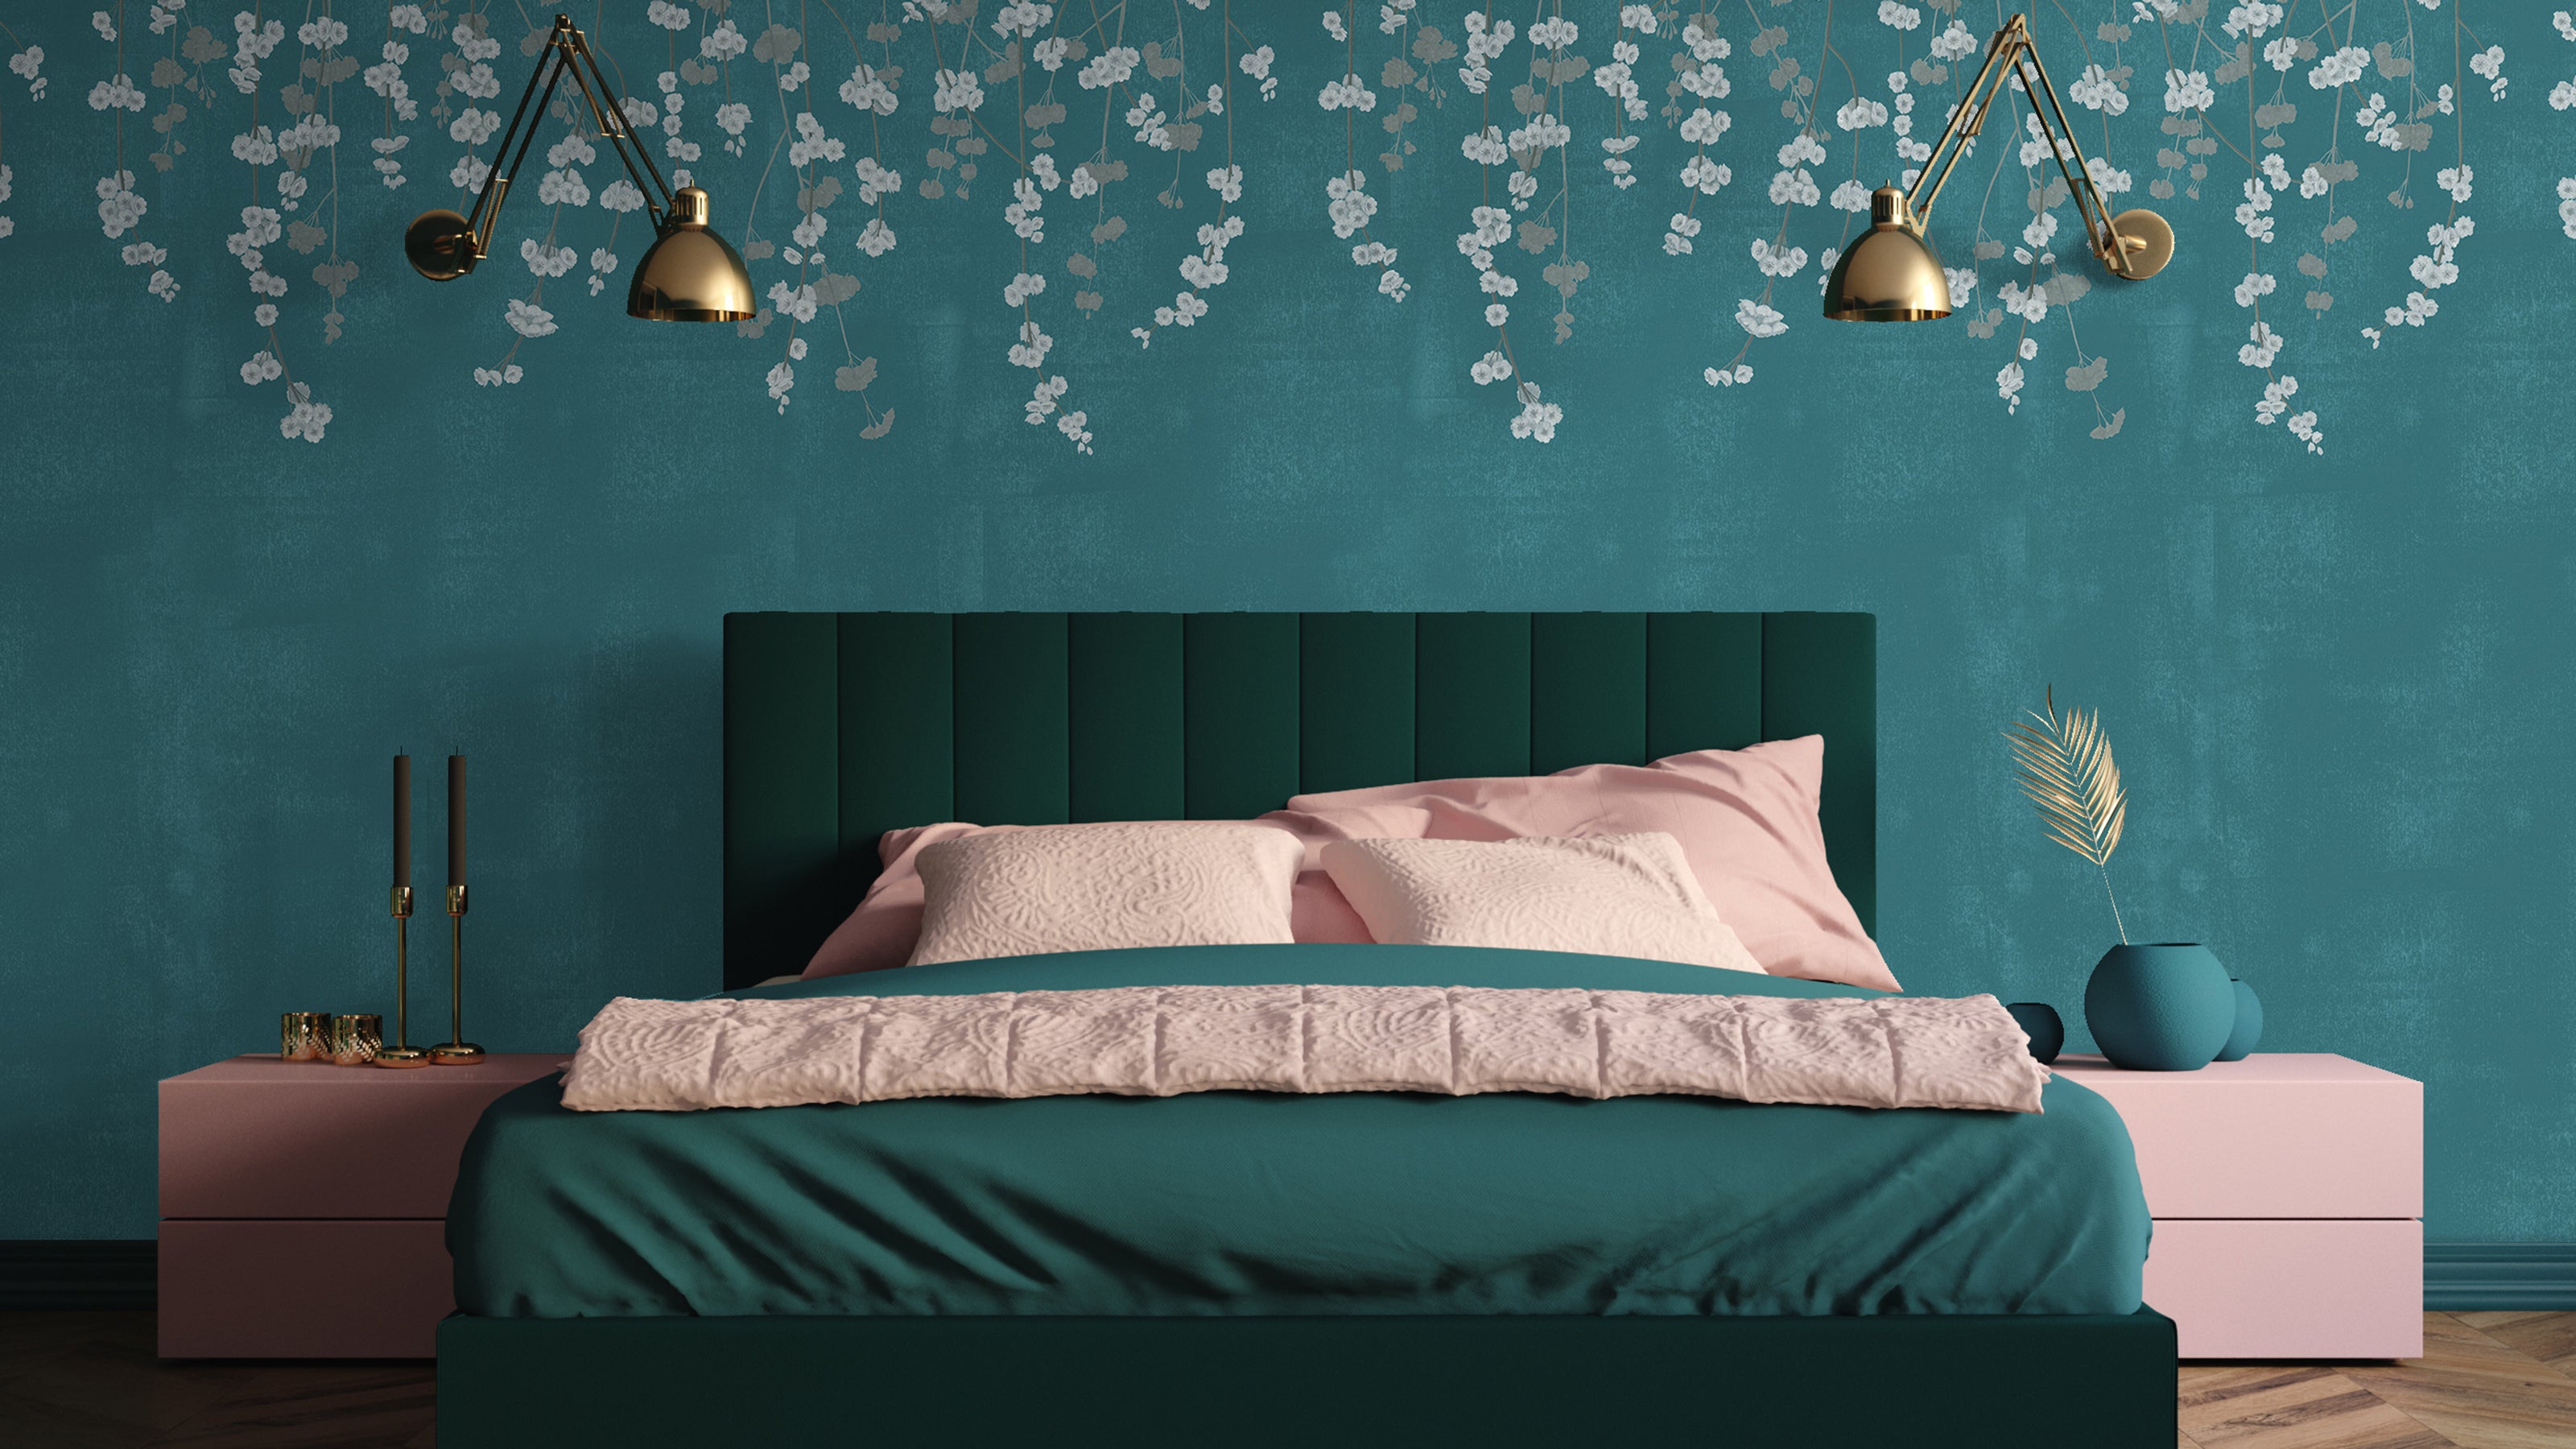 Teal and green accents in a nature-inspired bedroom